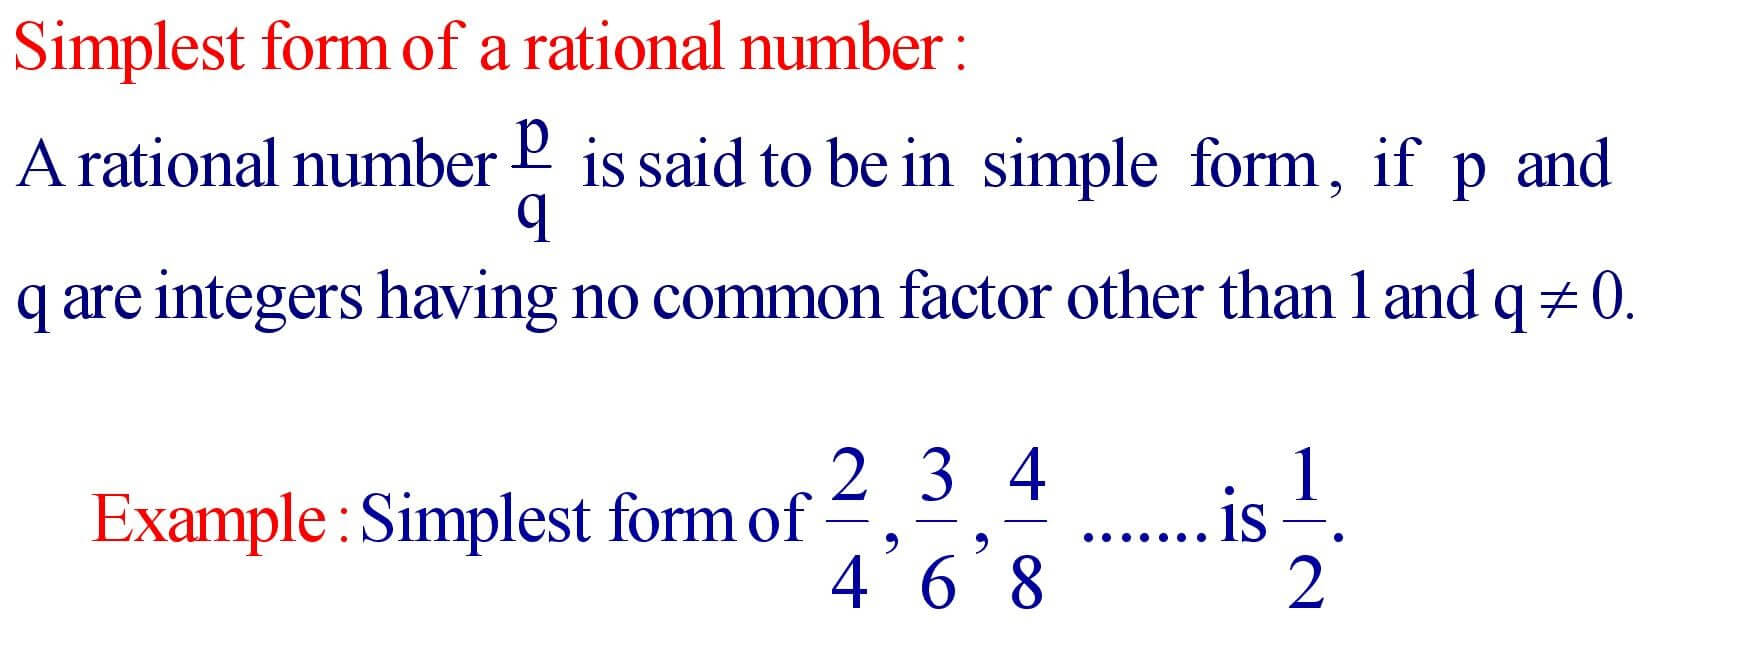 Simplest form of a rational number